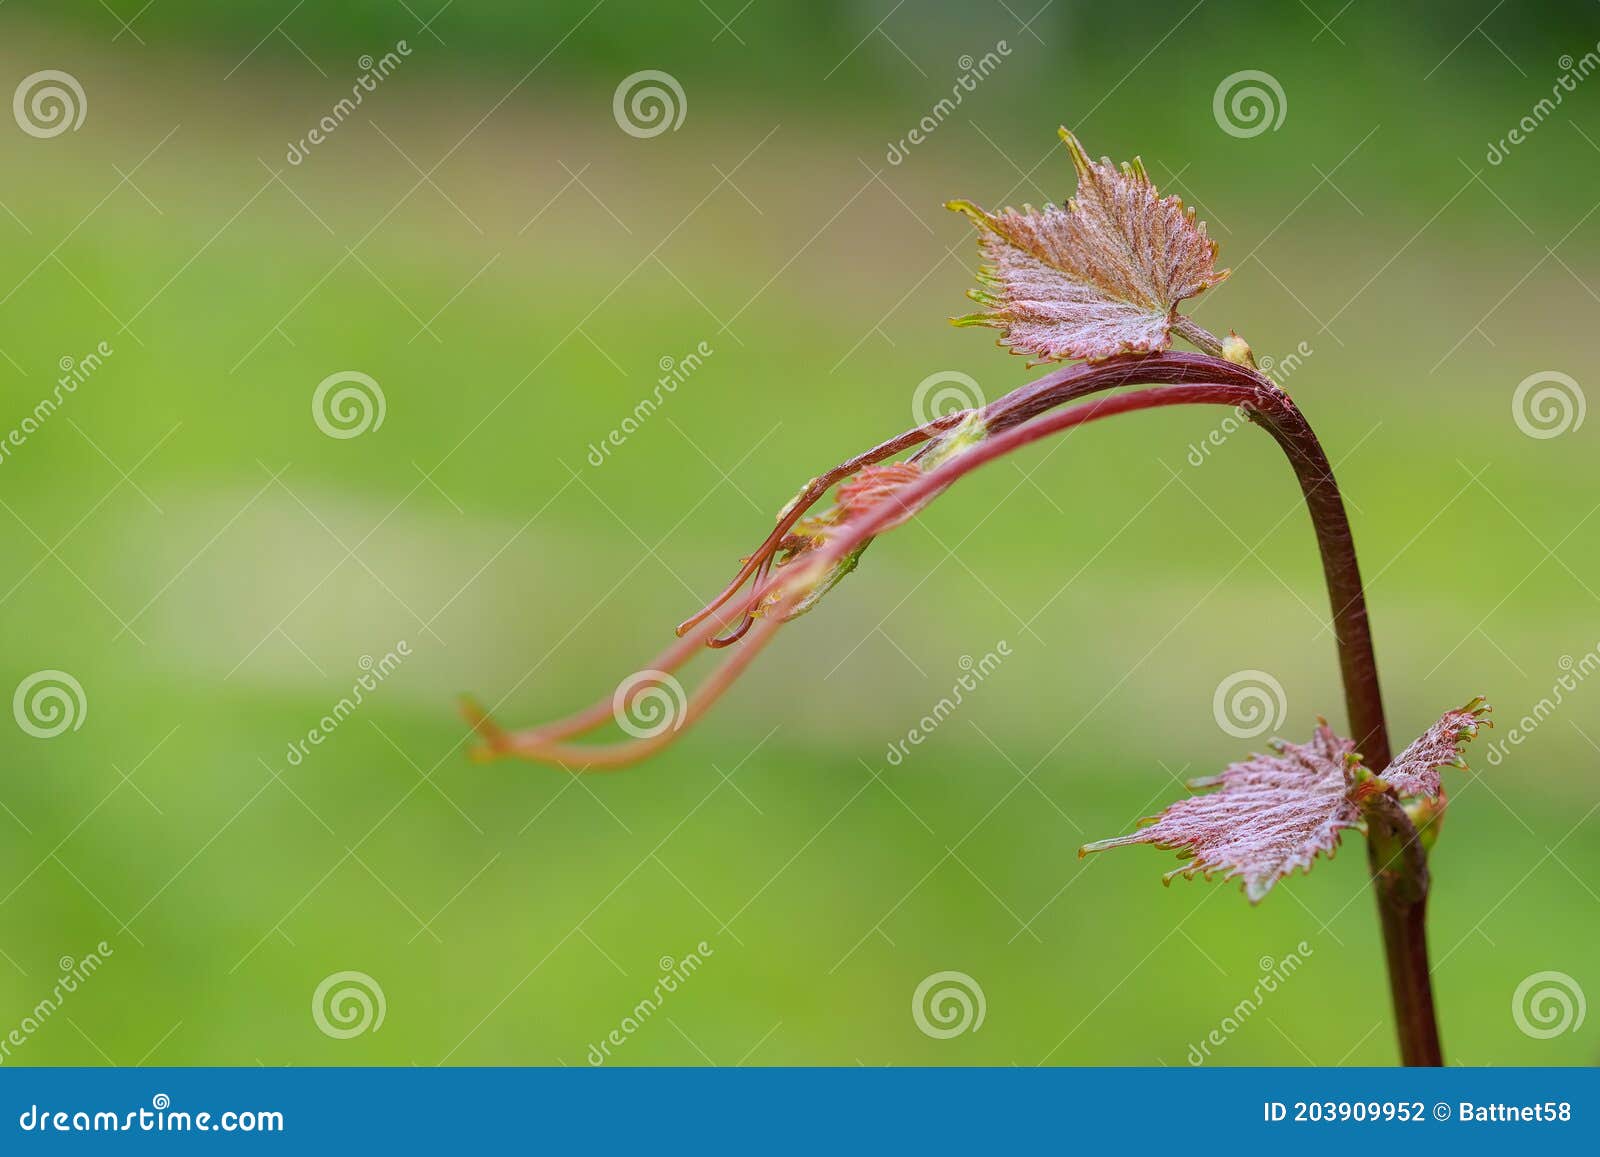 Spring Awakening of Nature the First Tender Shoots of the Vine. Stock